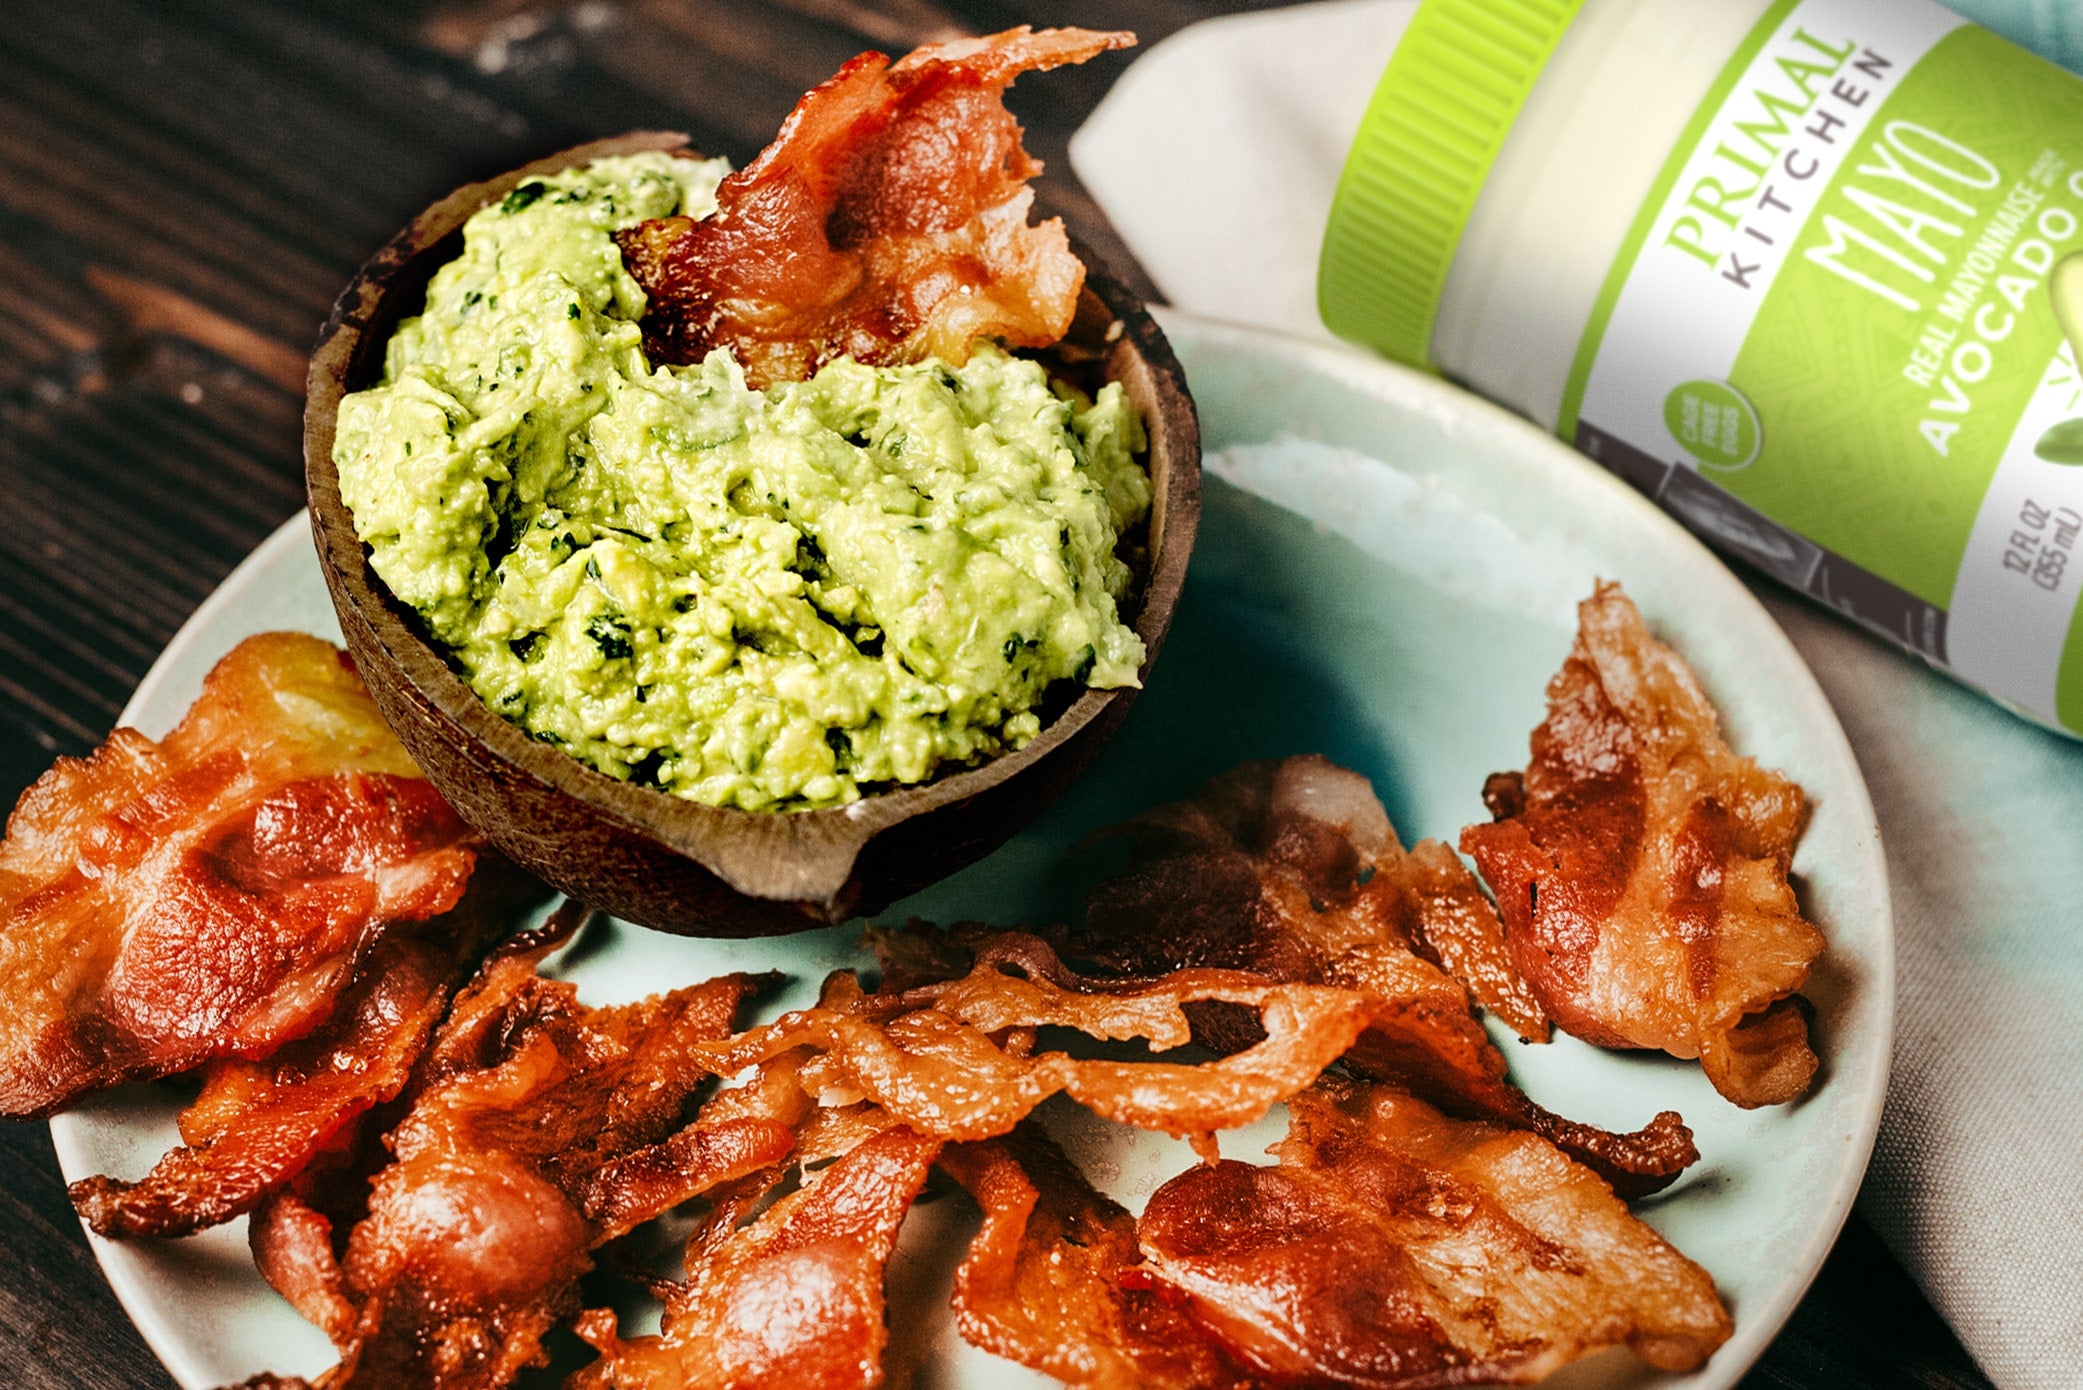 Bacon Chips with Guacamole Dip